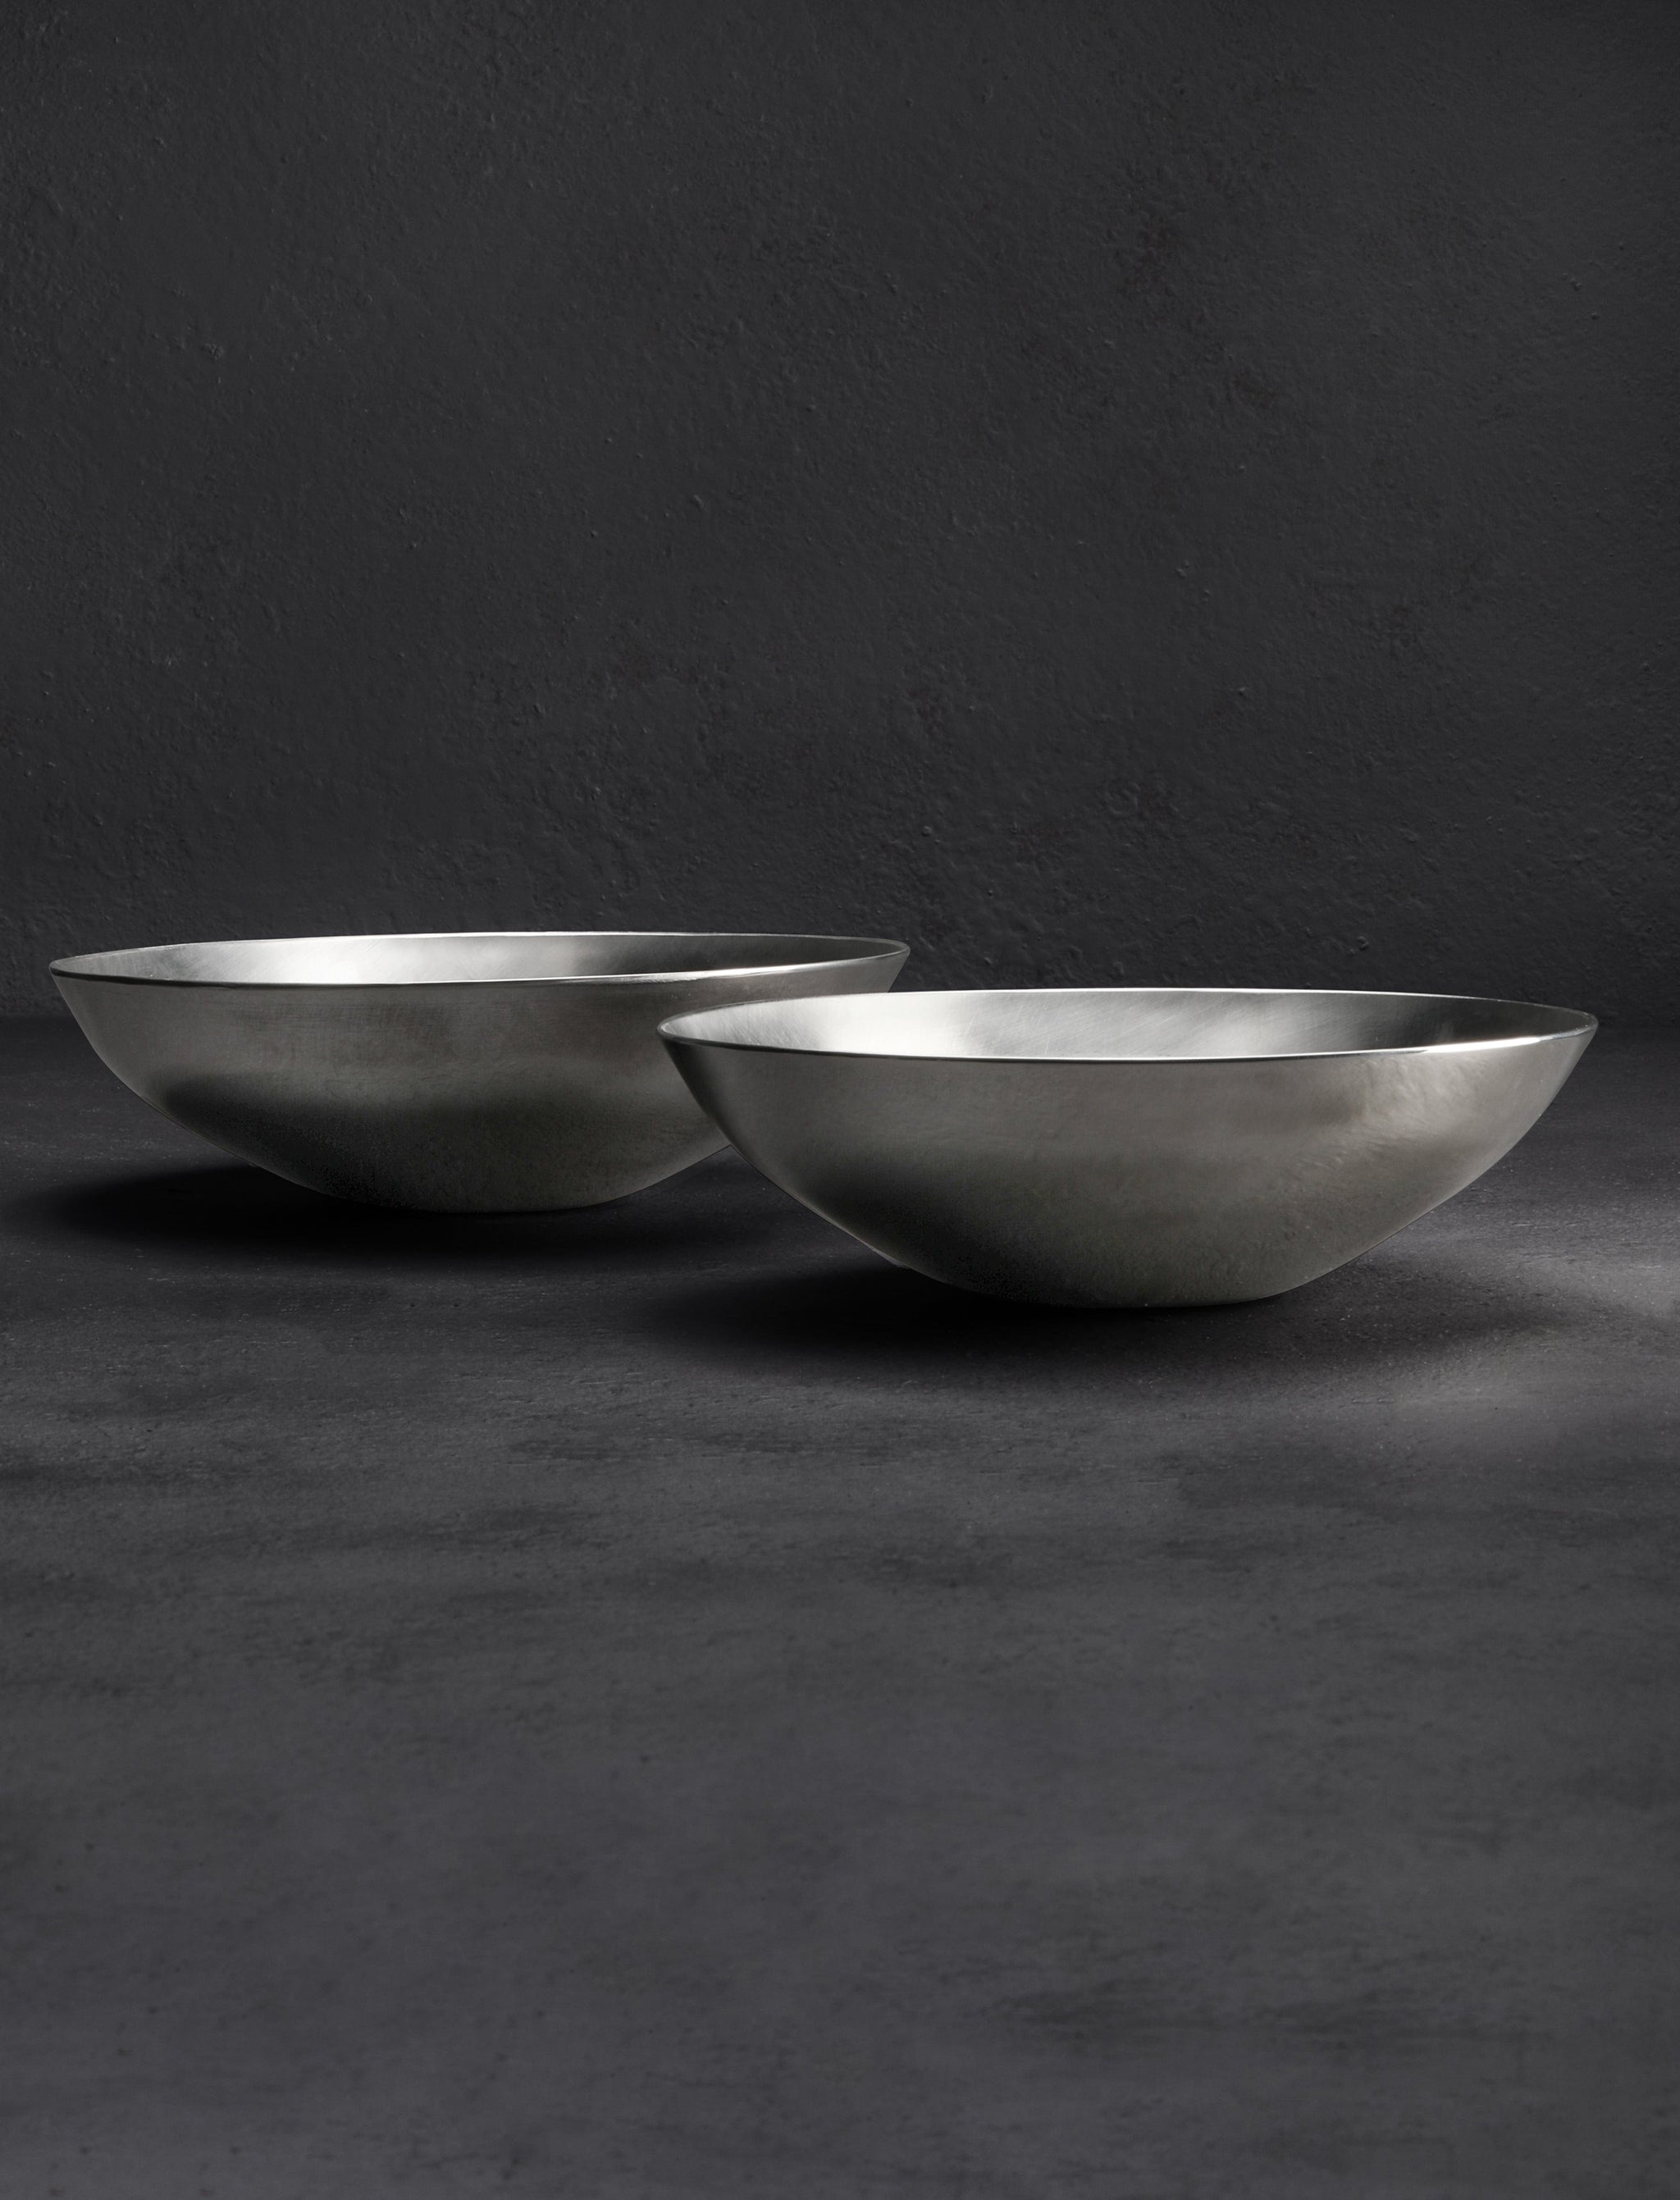 Stephen Fitz Gerald - California Serving Pair of Bowls Forged Steel Soup Bowl